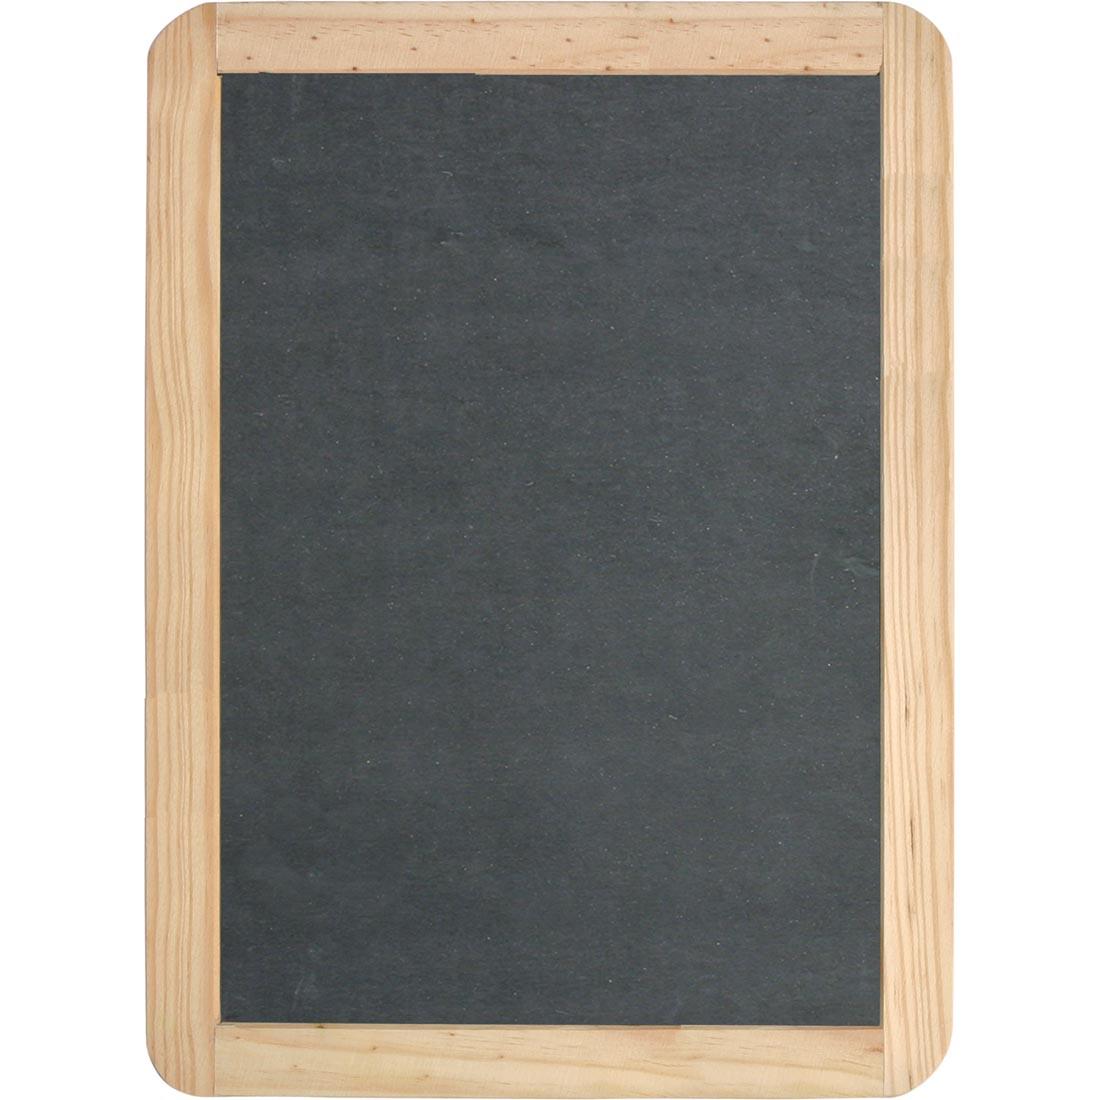 Slate Chalkboard trimmed with natural wood